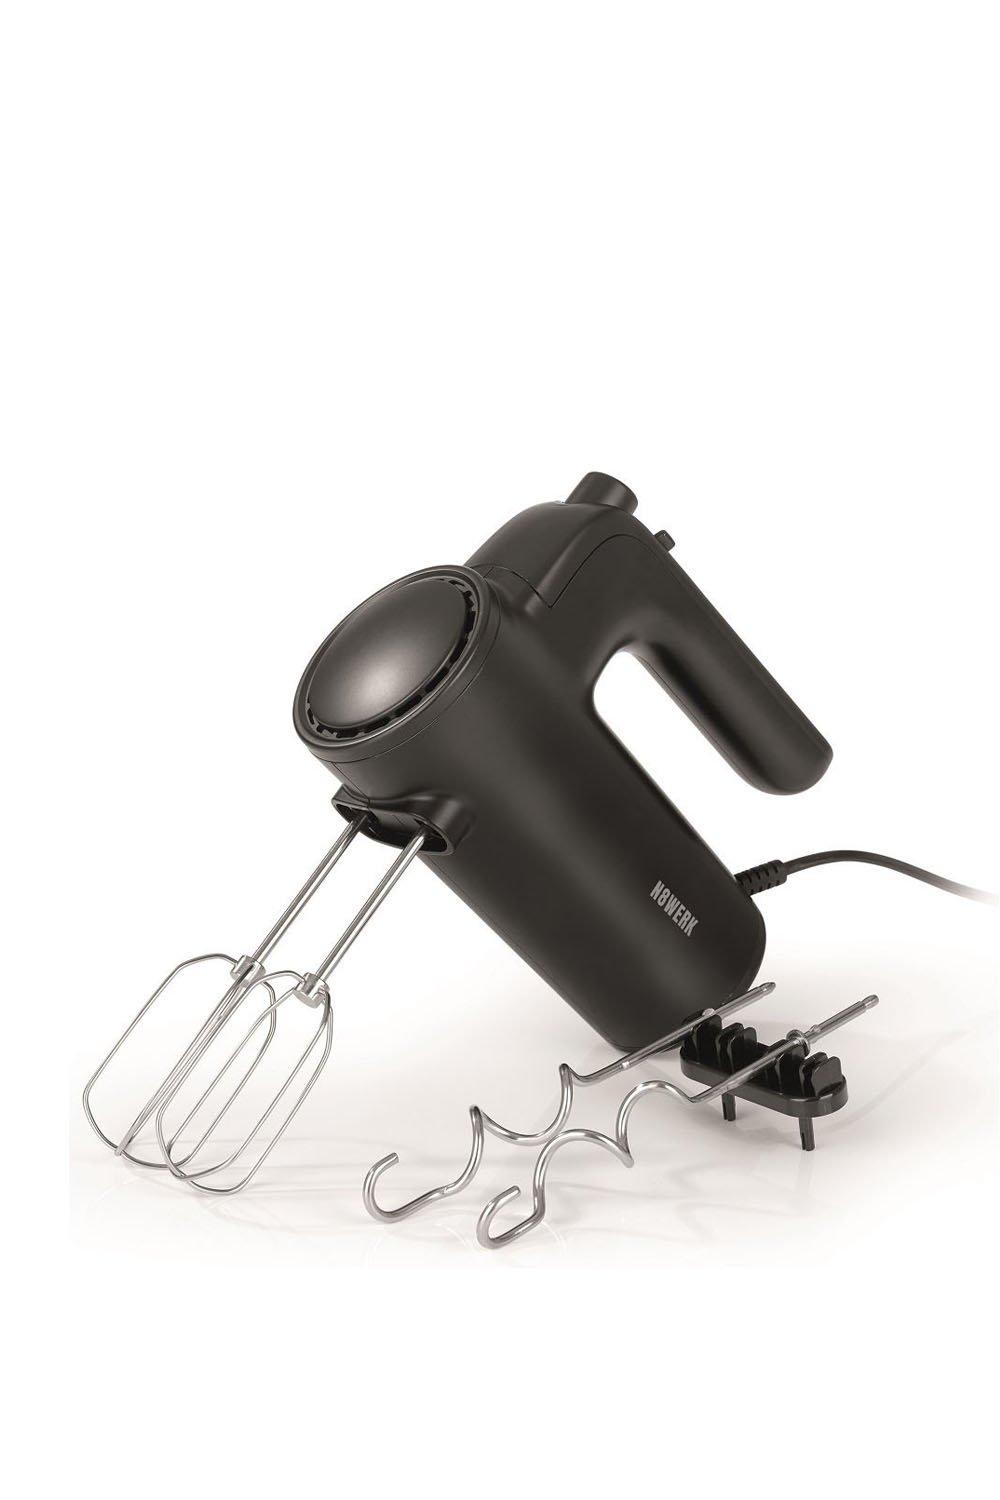 Food Processors & Mixers  Hand Mixer with 3 attachments - Black